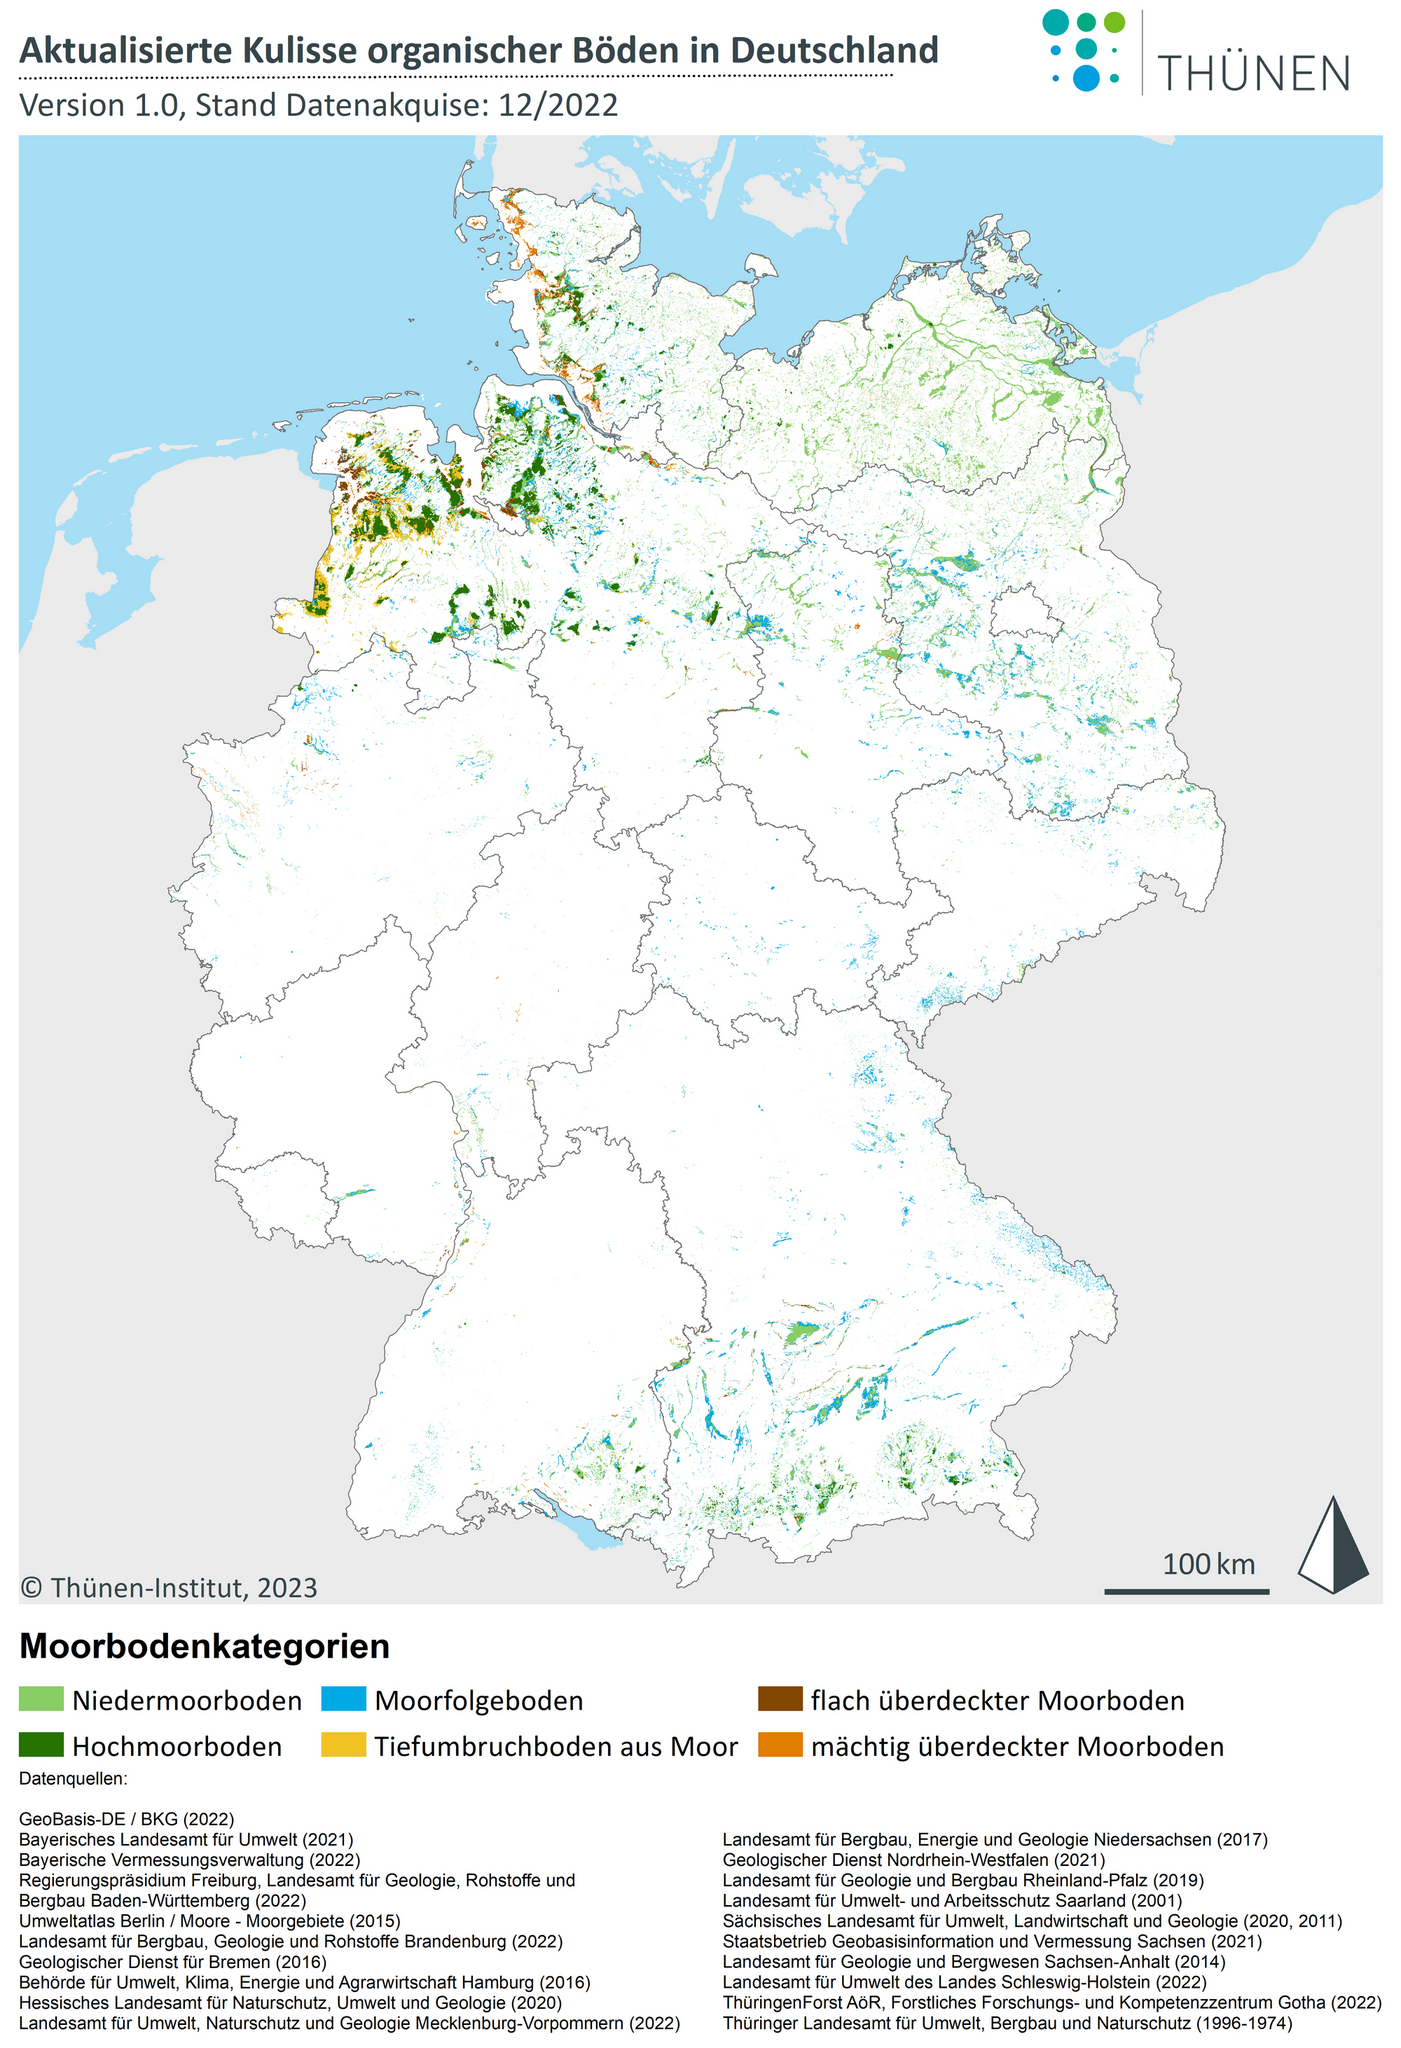 Updated Map of Organic Soils in Germany